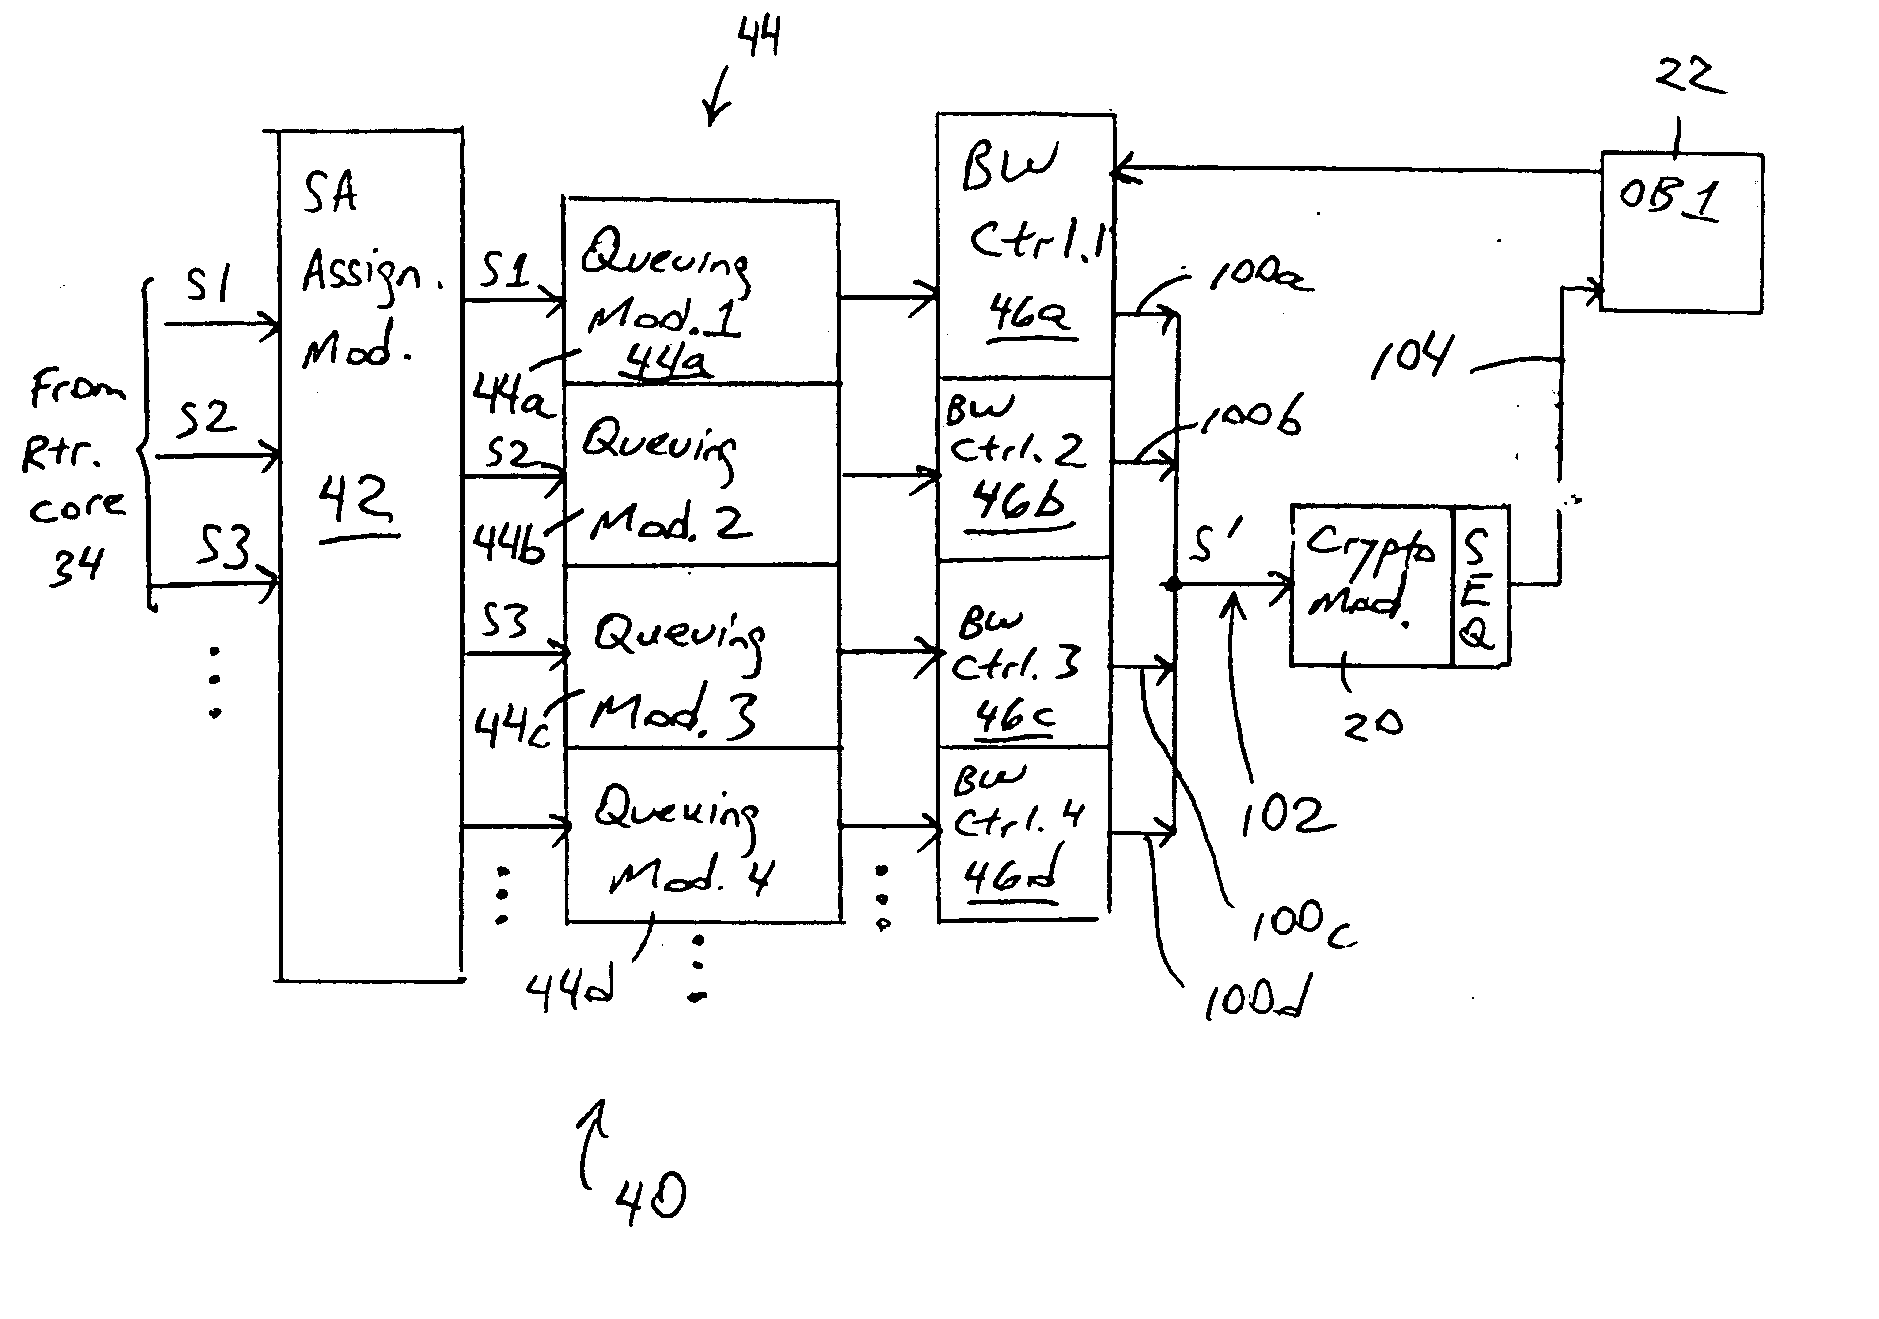 Arrangement in an IP node for preserving security-based sequences by ordering IP packets according to quality of service requirements prior to encryption